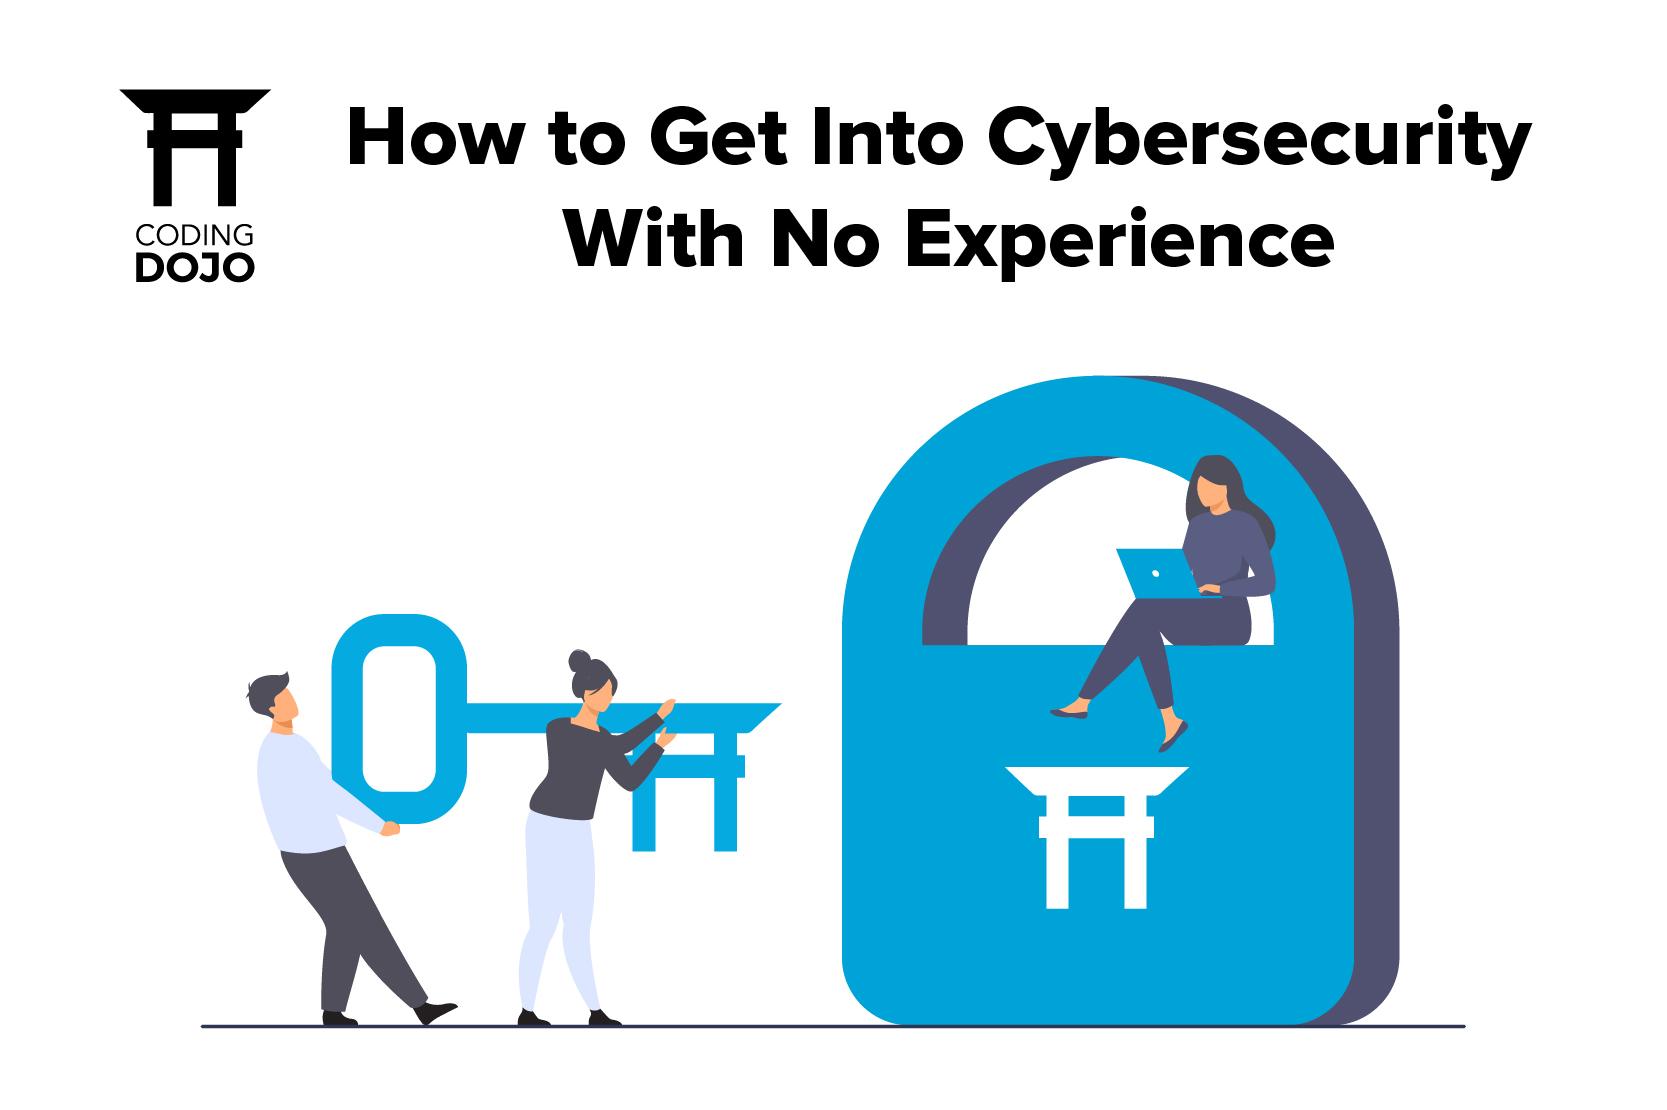 How to Get Into Cybersecurity With No Experience